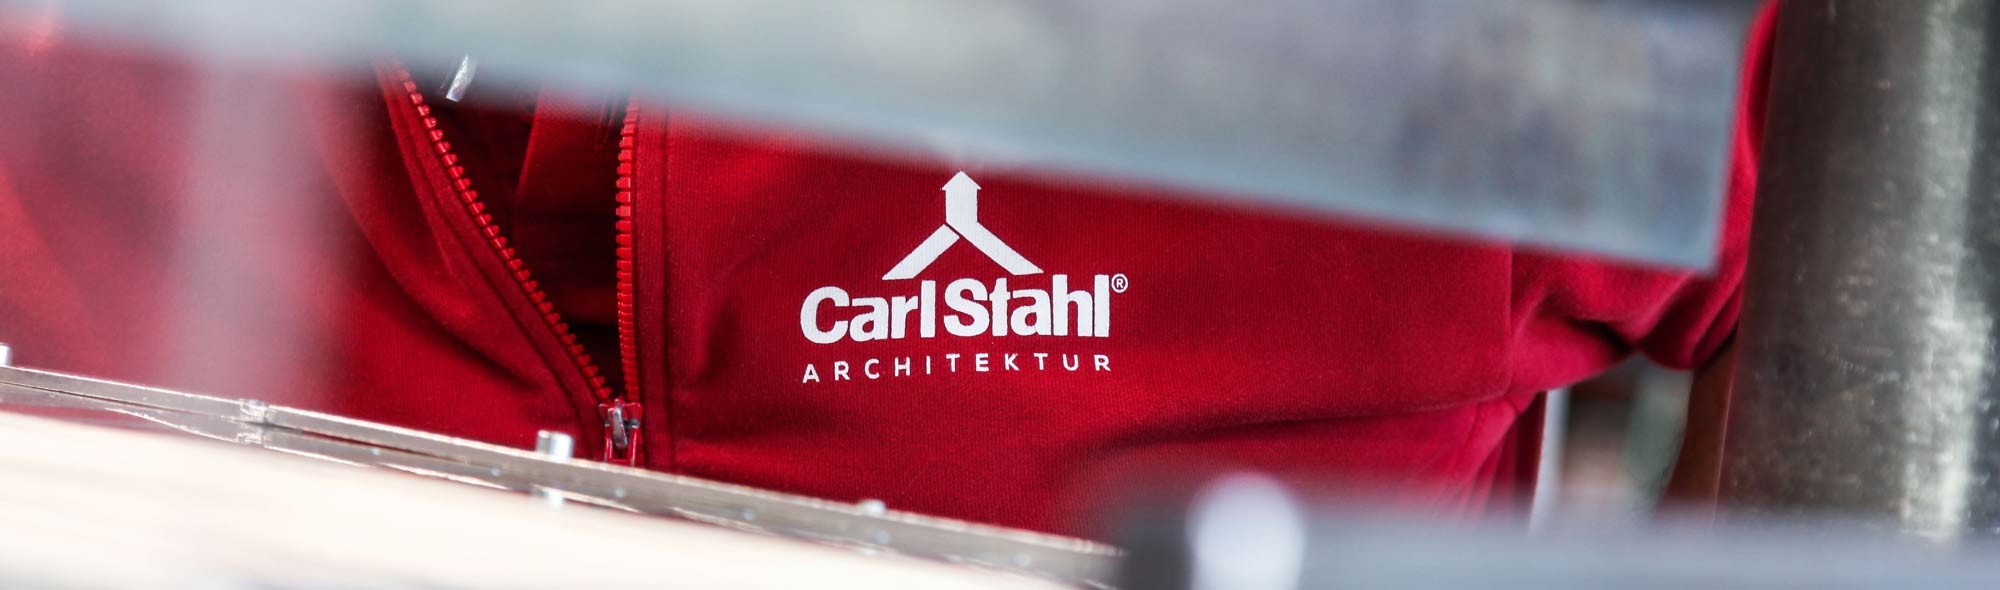 Career with Carl Stahl Architecture